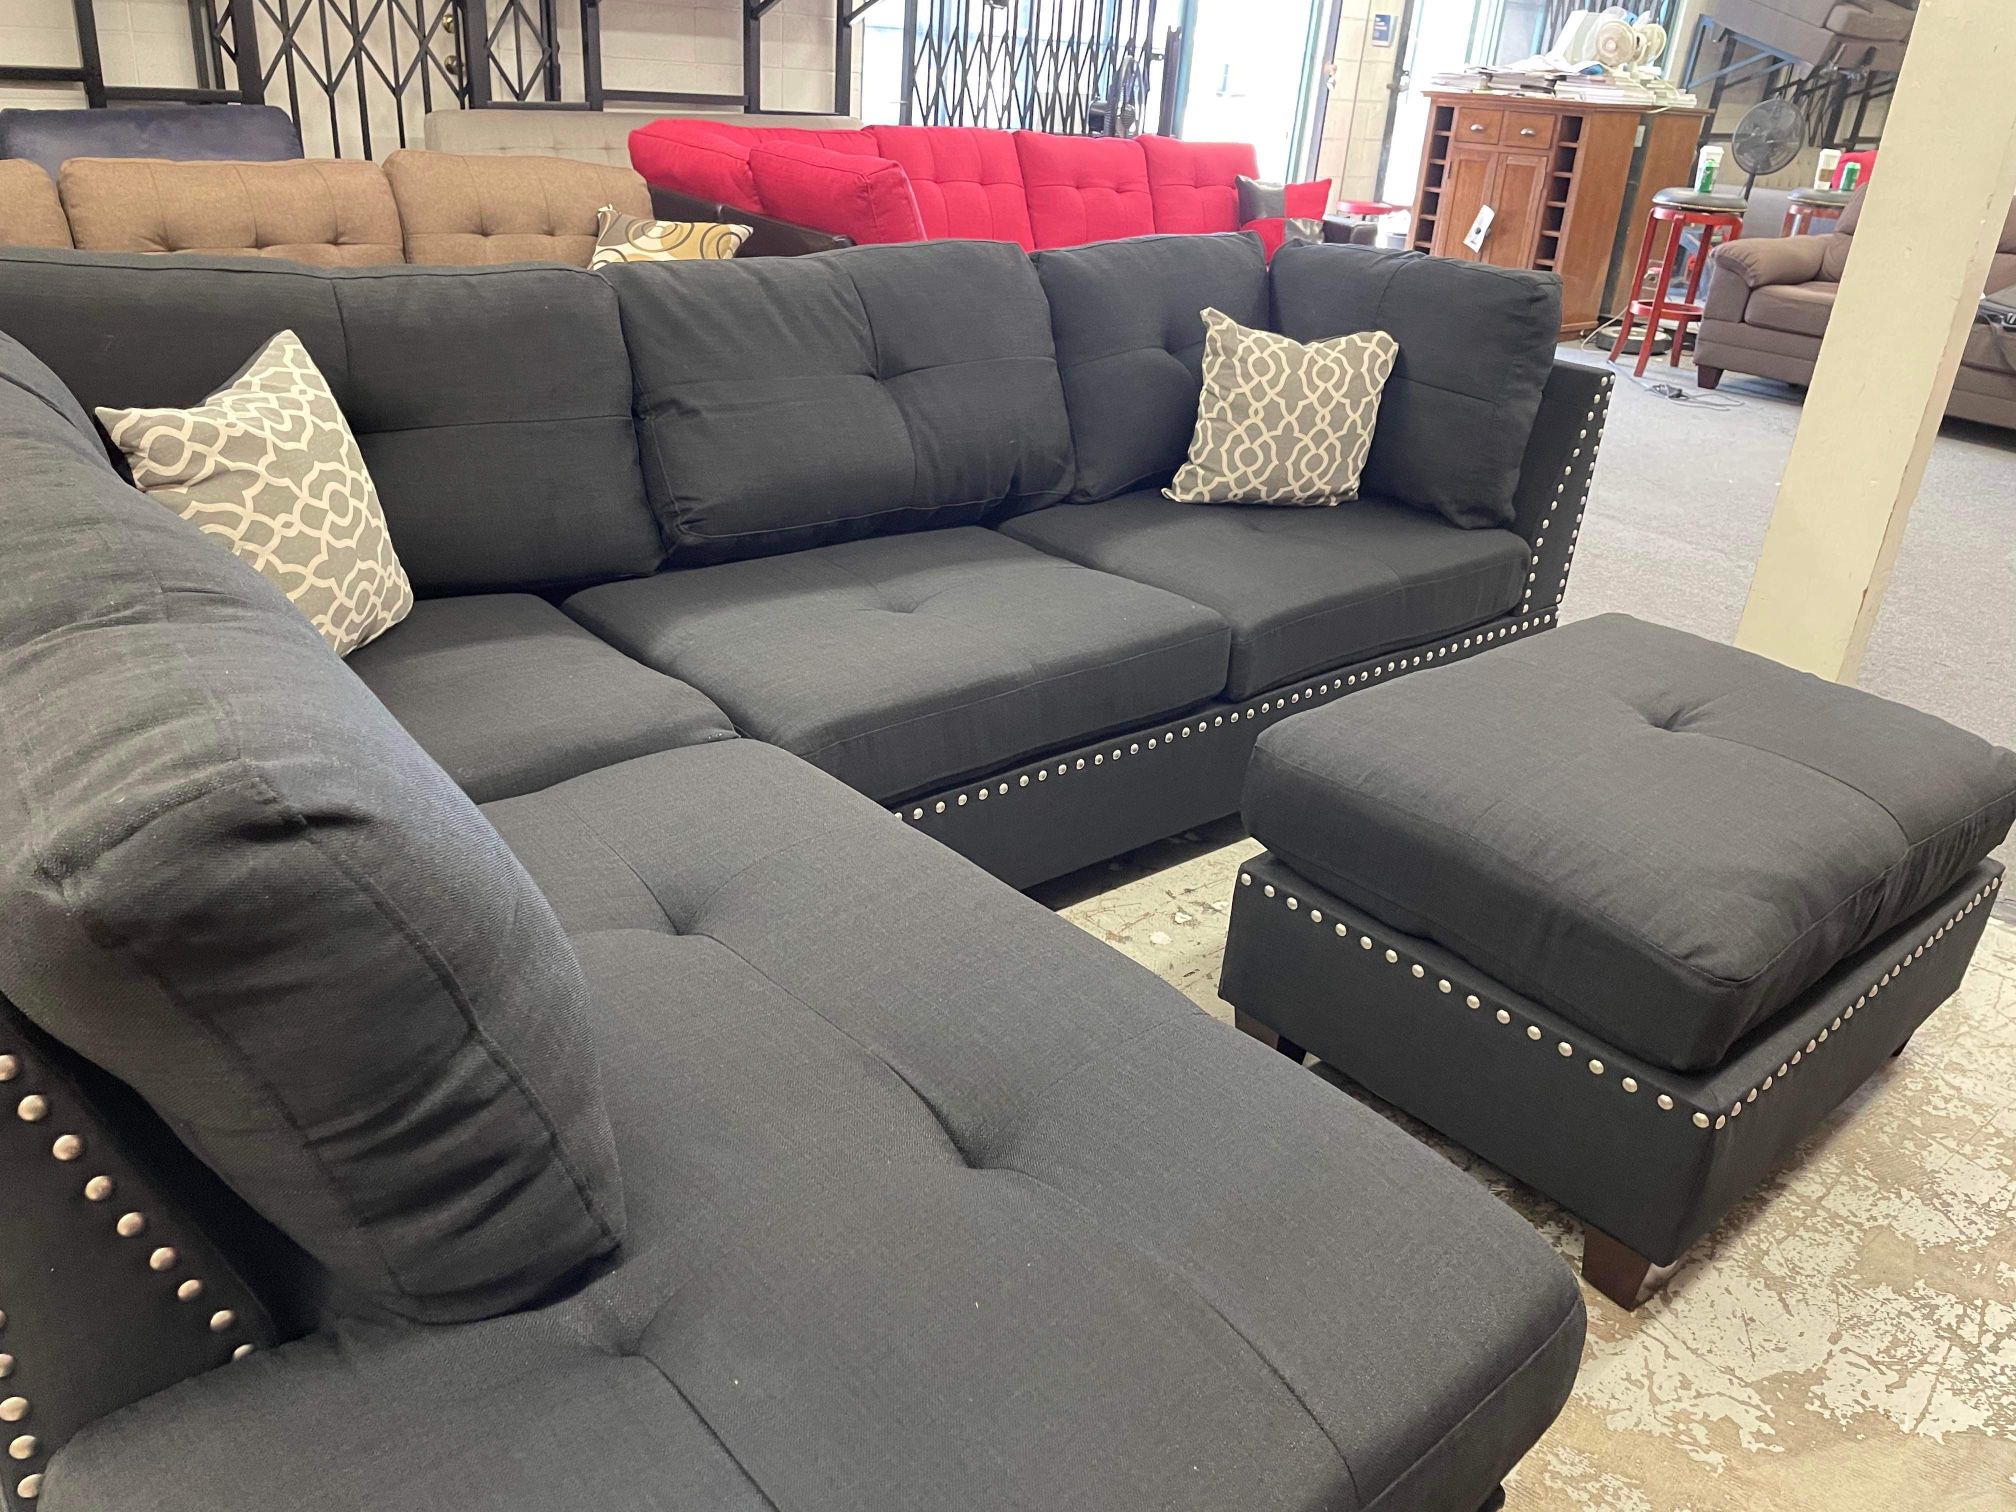 New Black Nailhead Sectional Couch ! Free Delivery 🚚 ! Financing Available  ! 